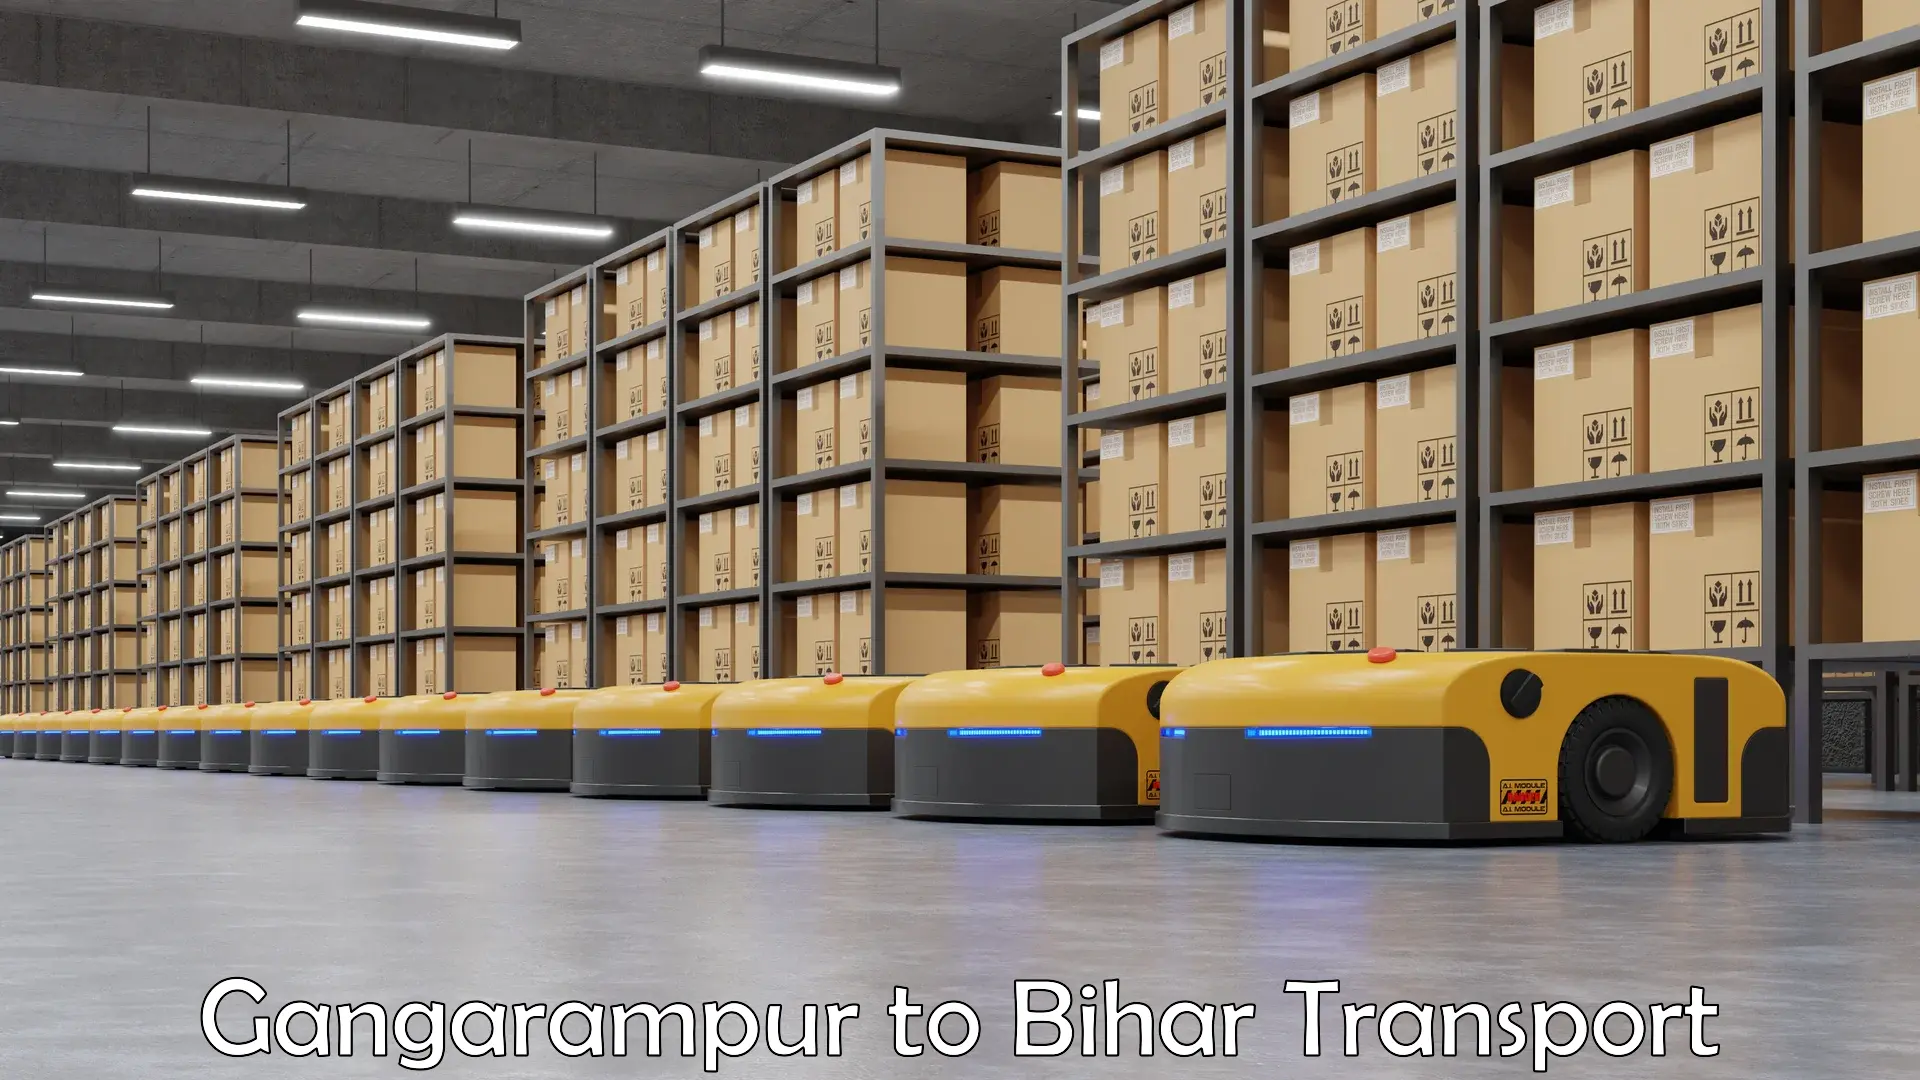 Air cargo transport services in Gangarampur to East Champaran